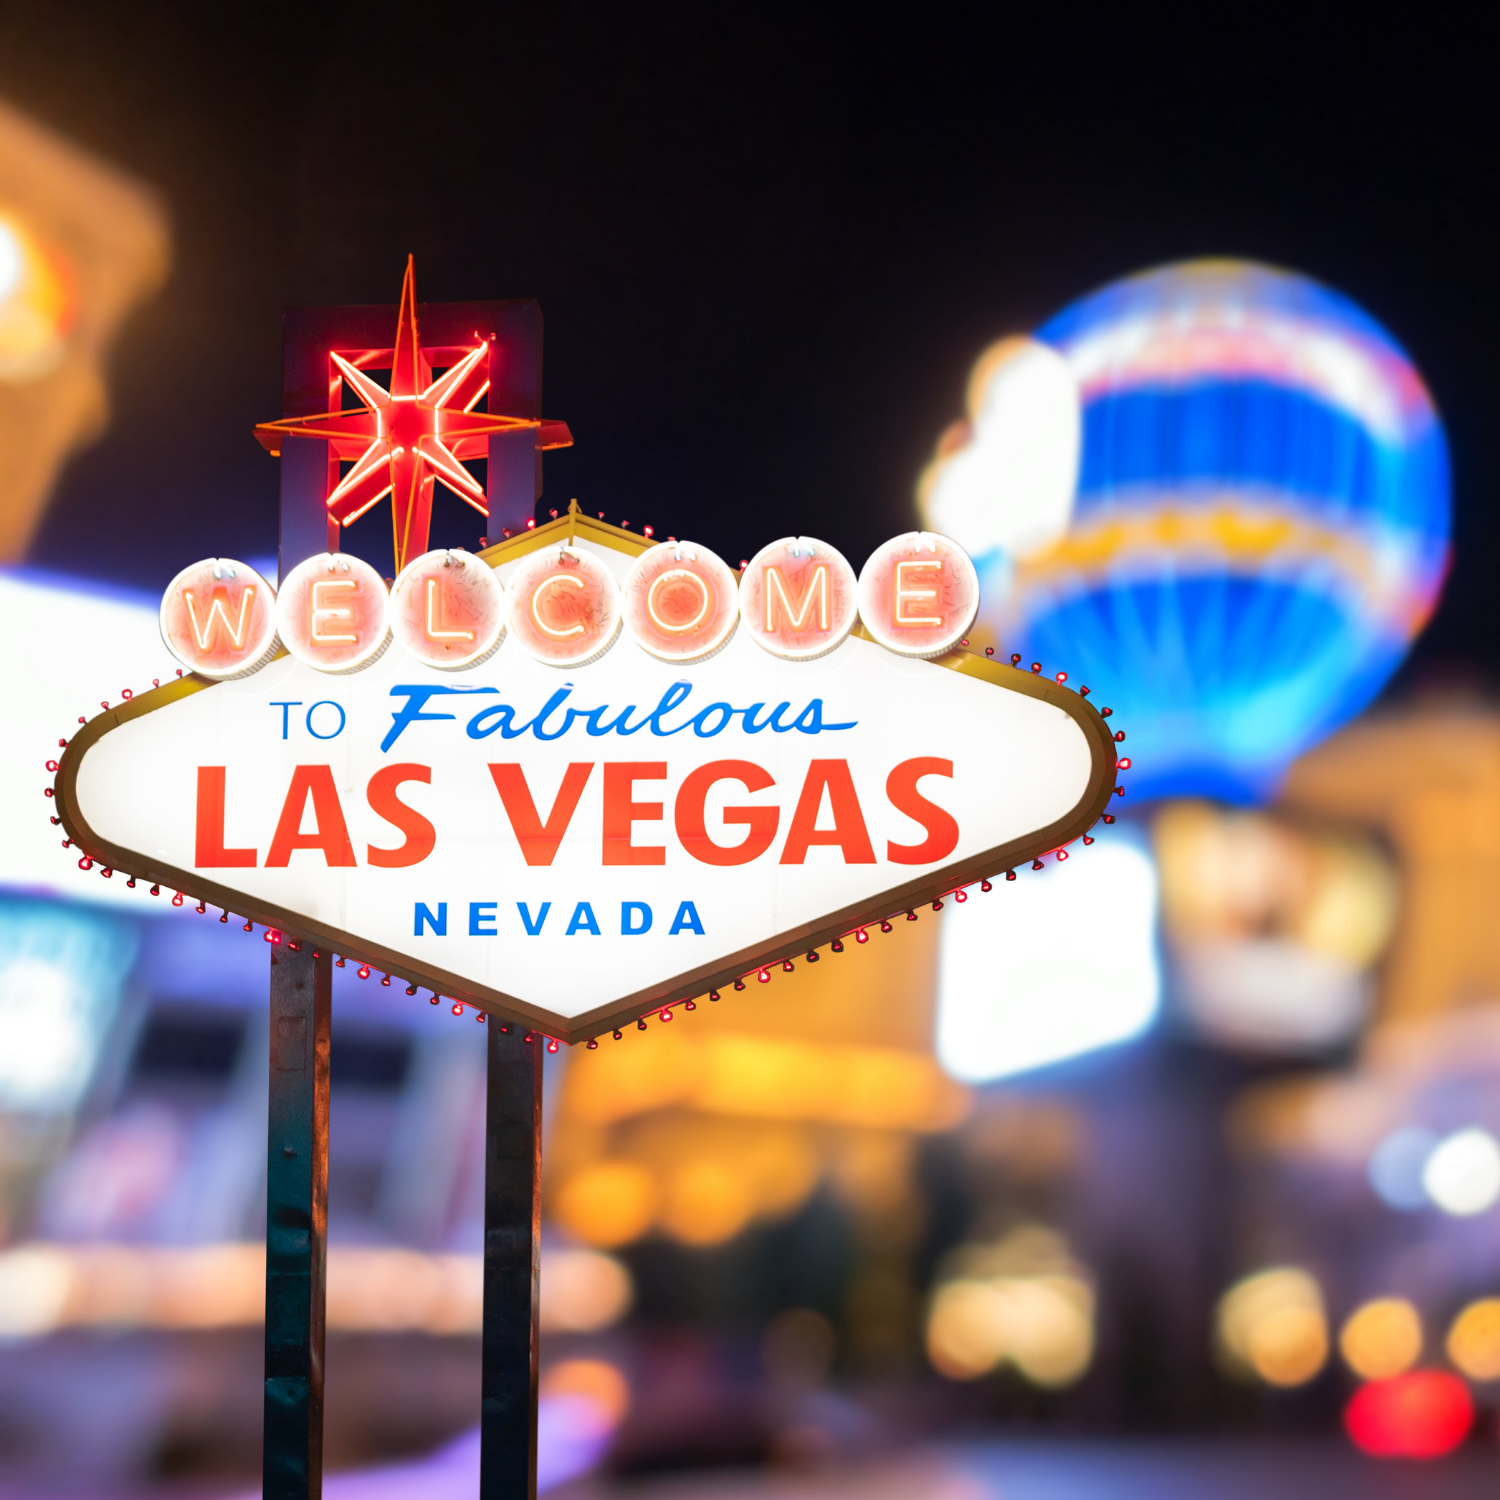 We offer local printing services in Las Vegas, NV but can ship anywhere in the United States